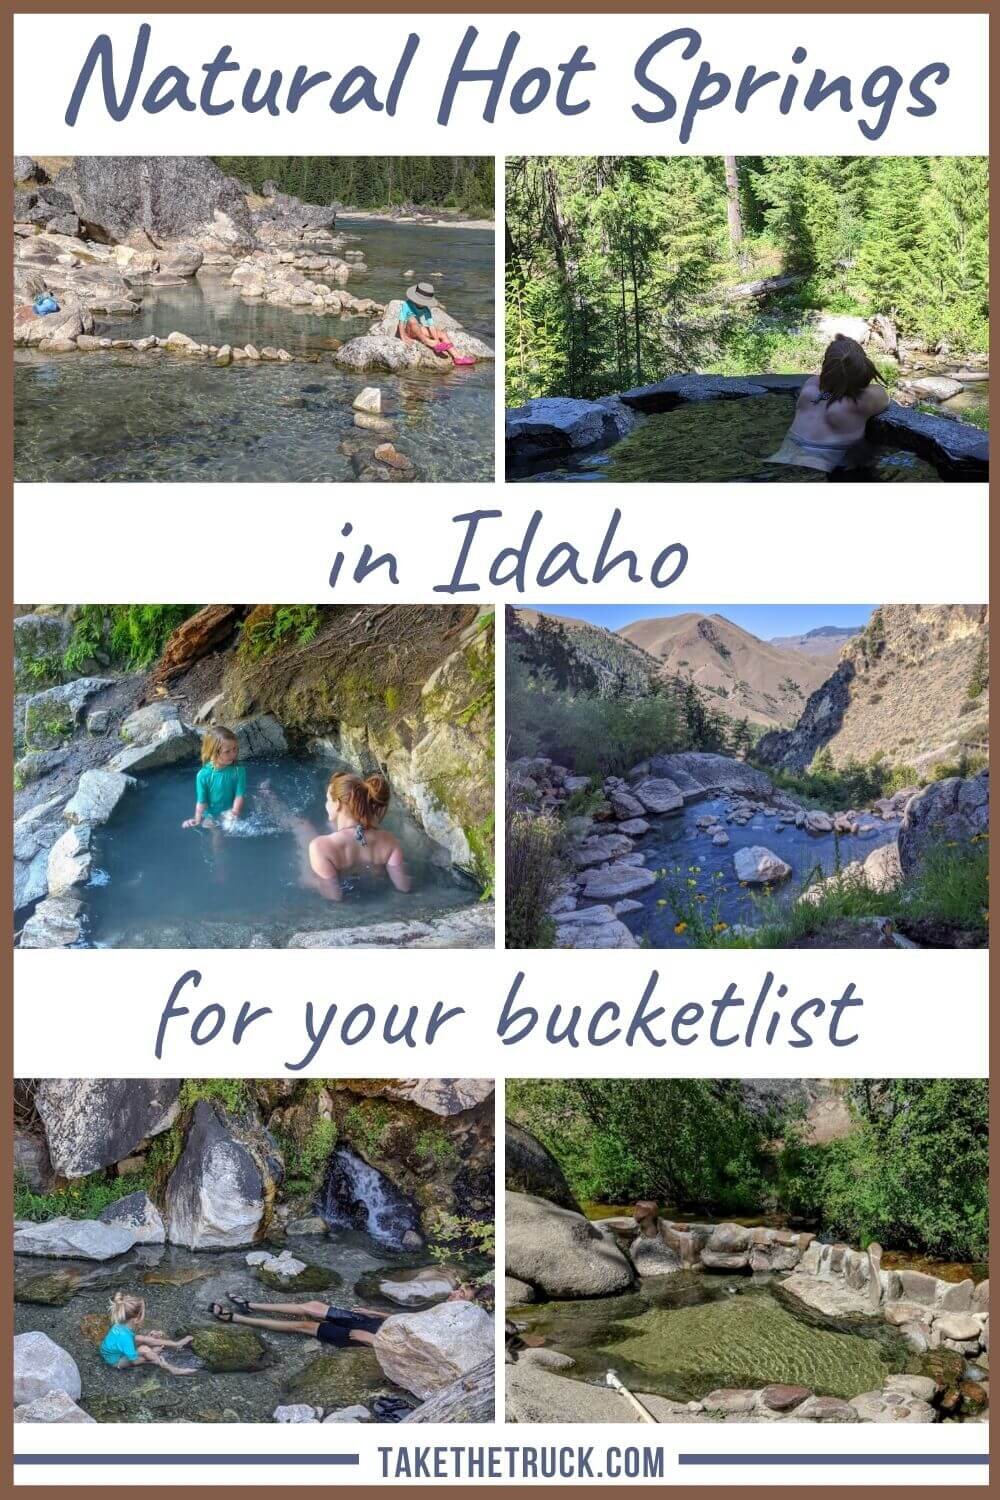 Check out these 5 awesome natural hot springs in Idaho - Goldbug, Sacajawea, Weir Creek, Trail Creek, and Rocky Canyon Hot Springs. Add these hot springs to your Idaho road trip list!